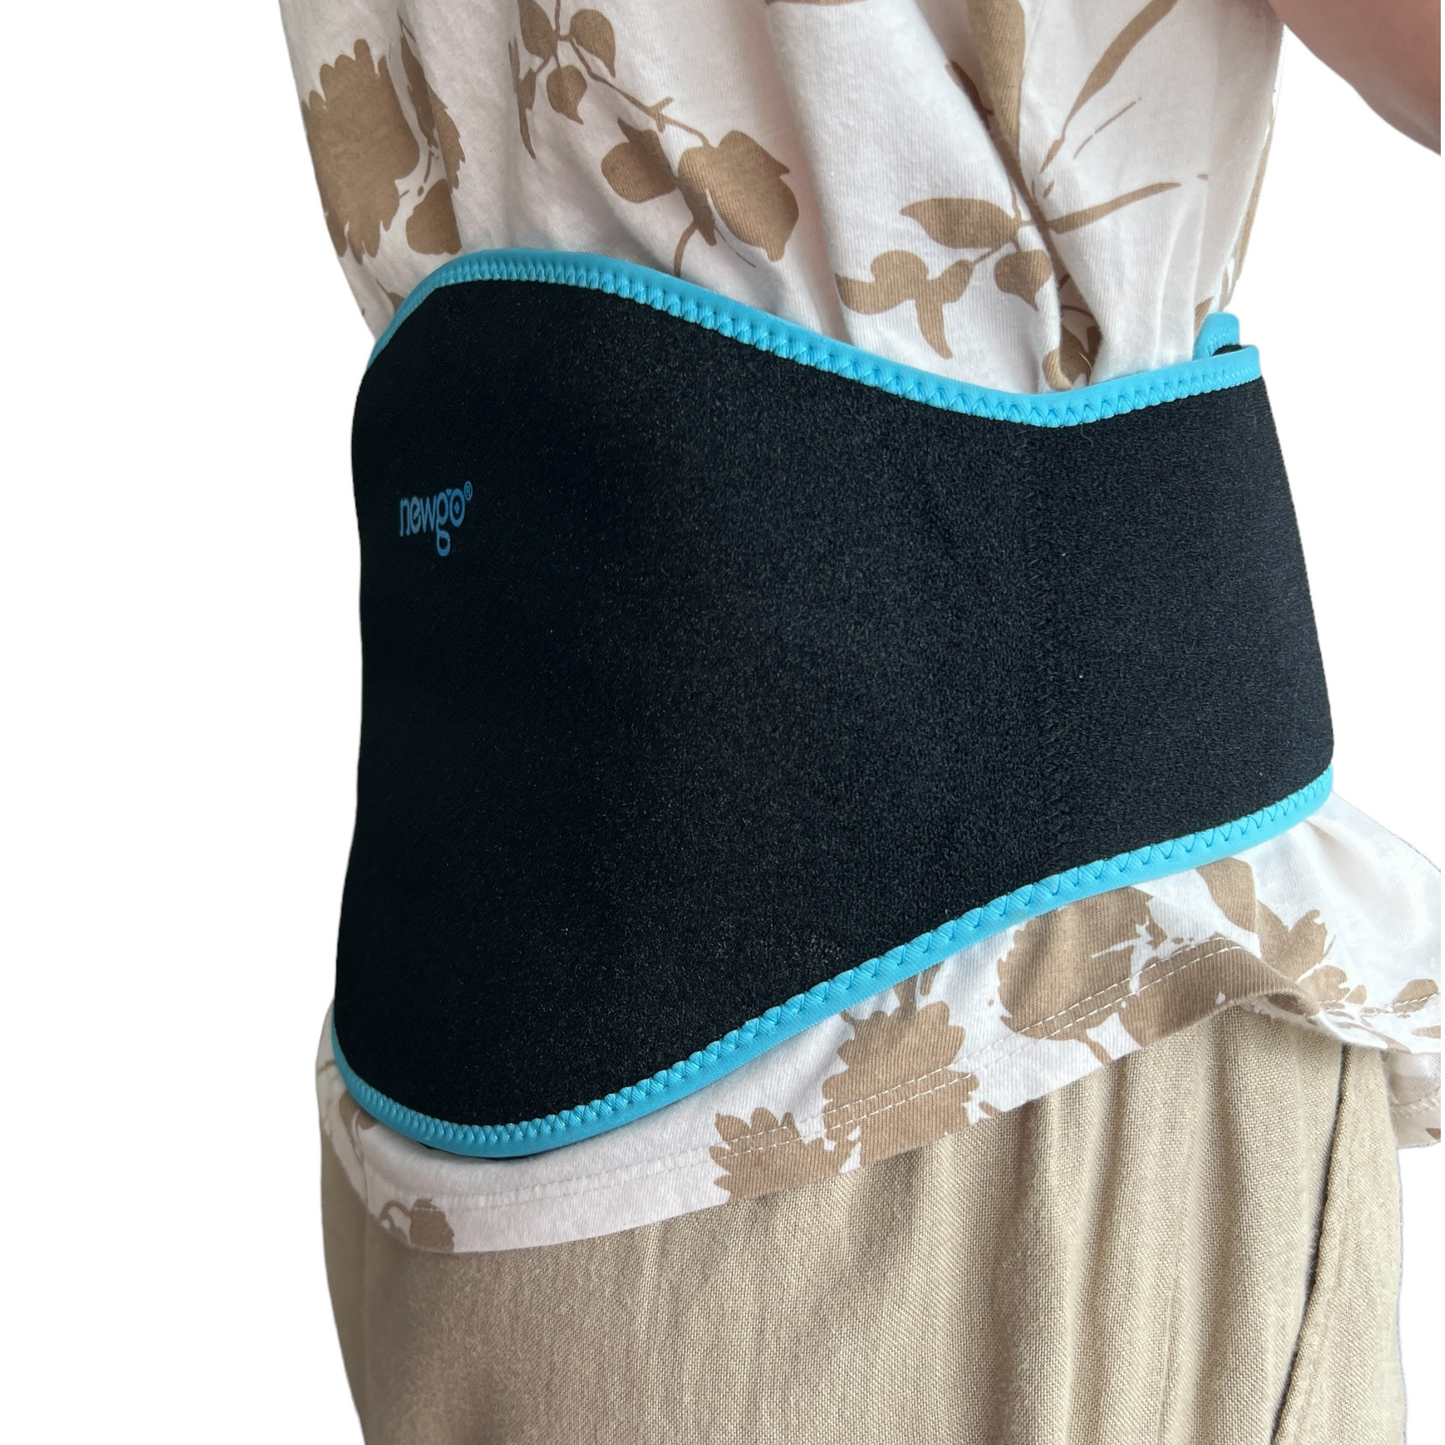 💎 Reusable Ice Pack - Back/Stomach Wrap Ice Packs SPIRIT SPARKPLUGS   